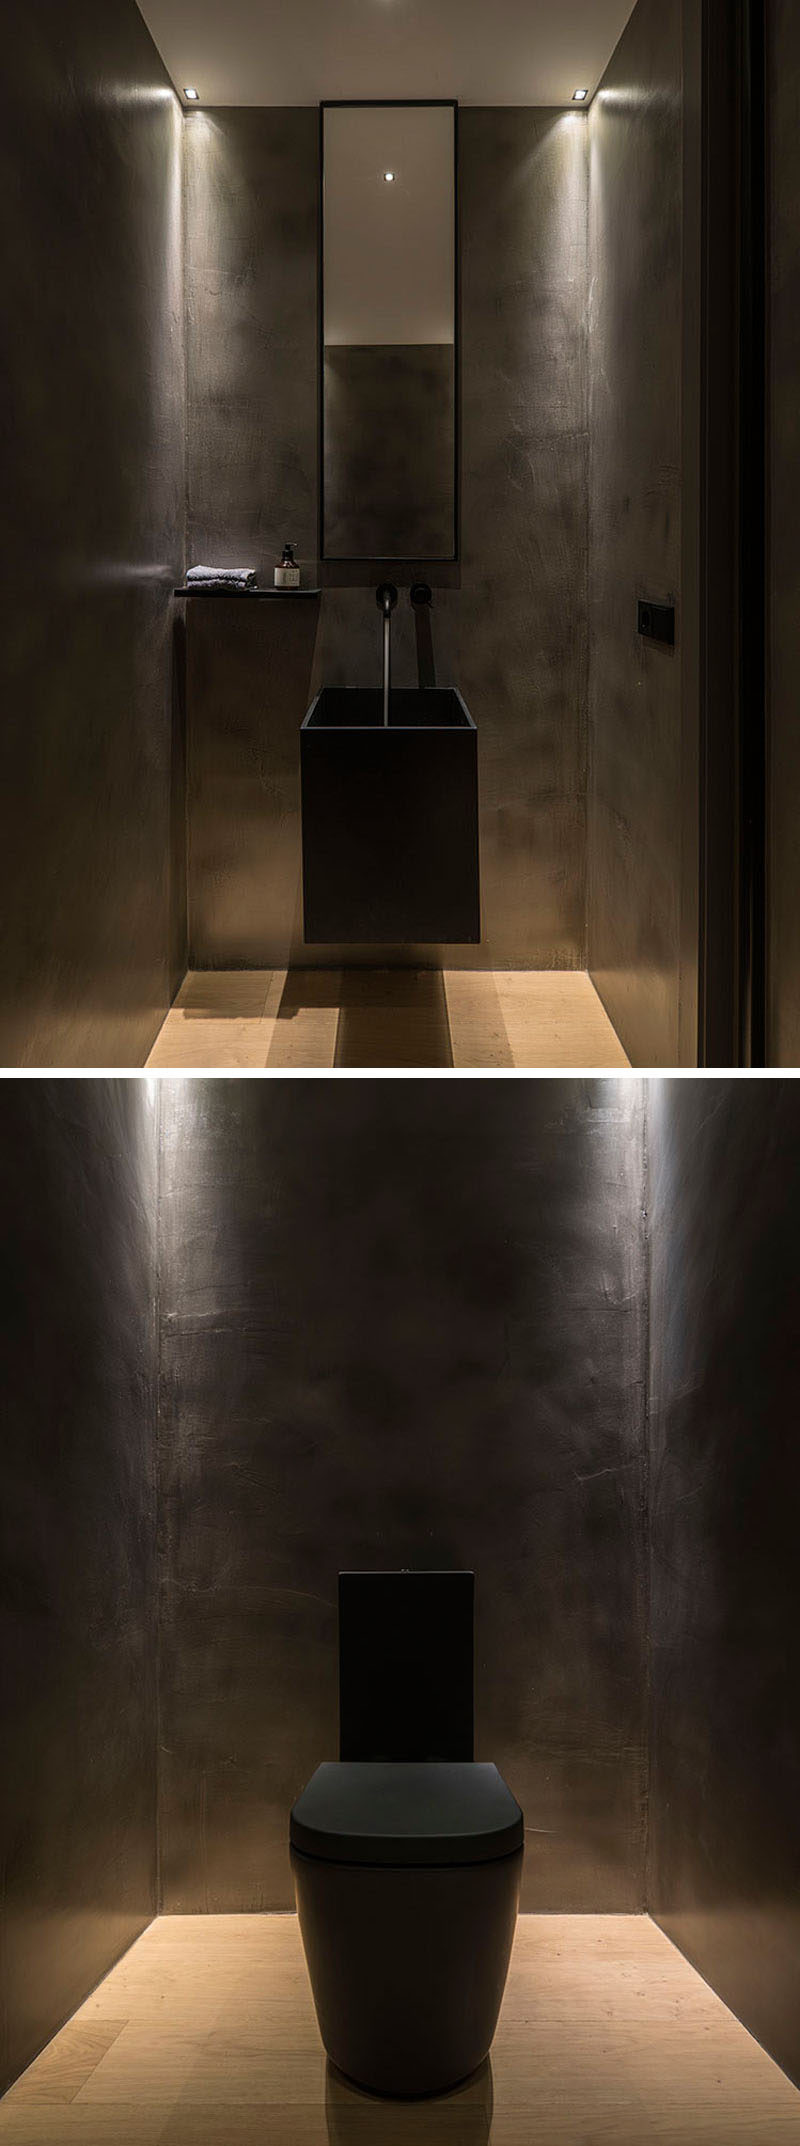 Inside this modern powder room, the walls, sink and toilet have been kept dark, creating a dramatic atmosphere,